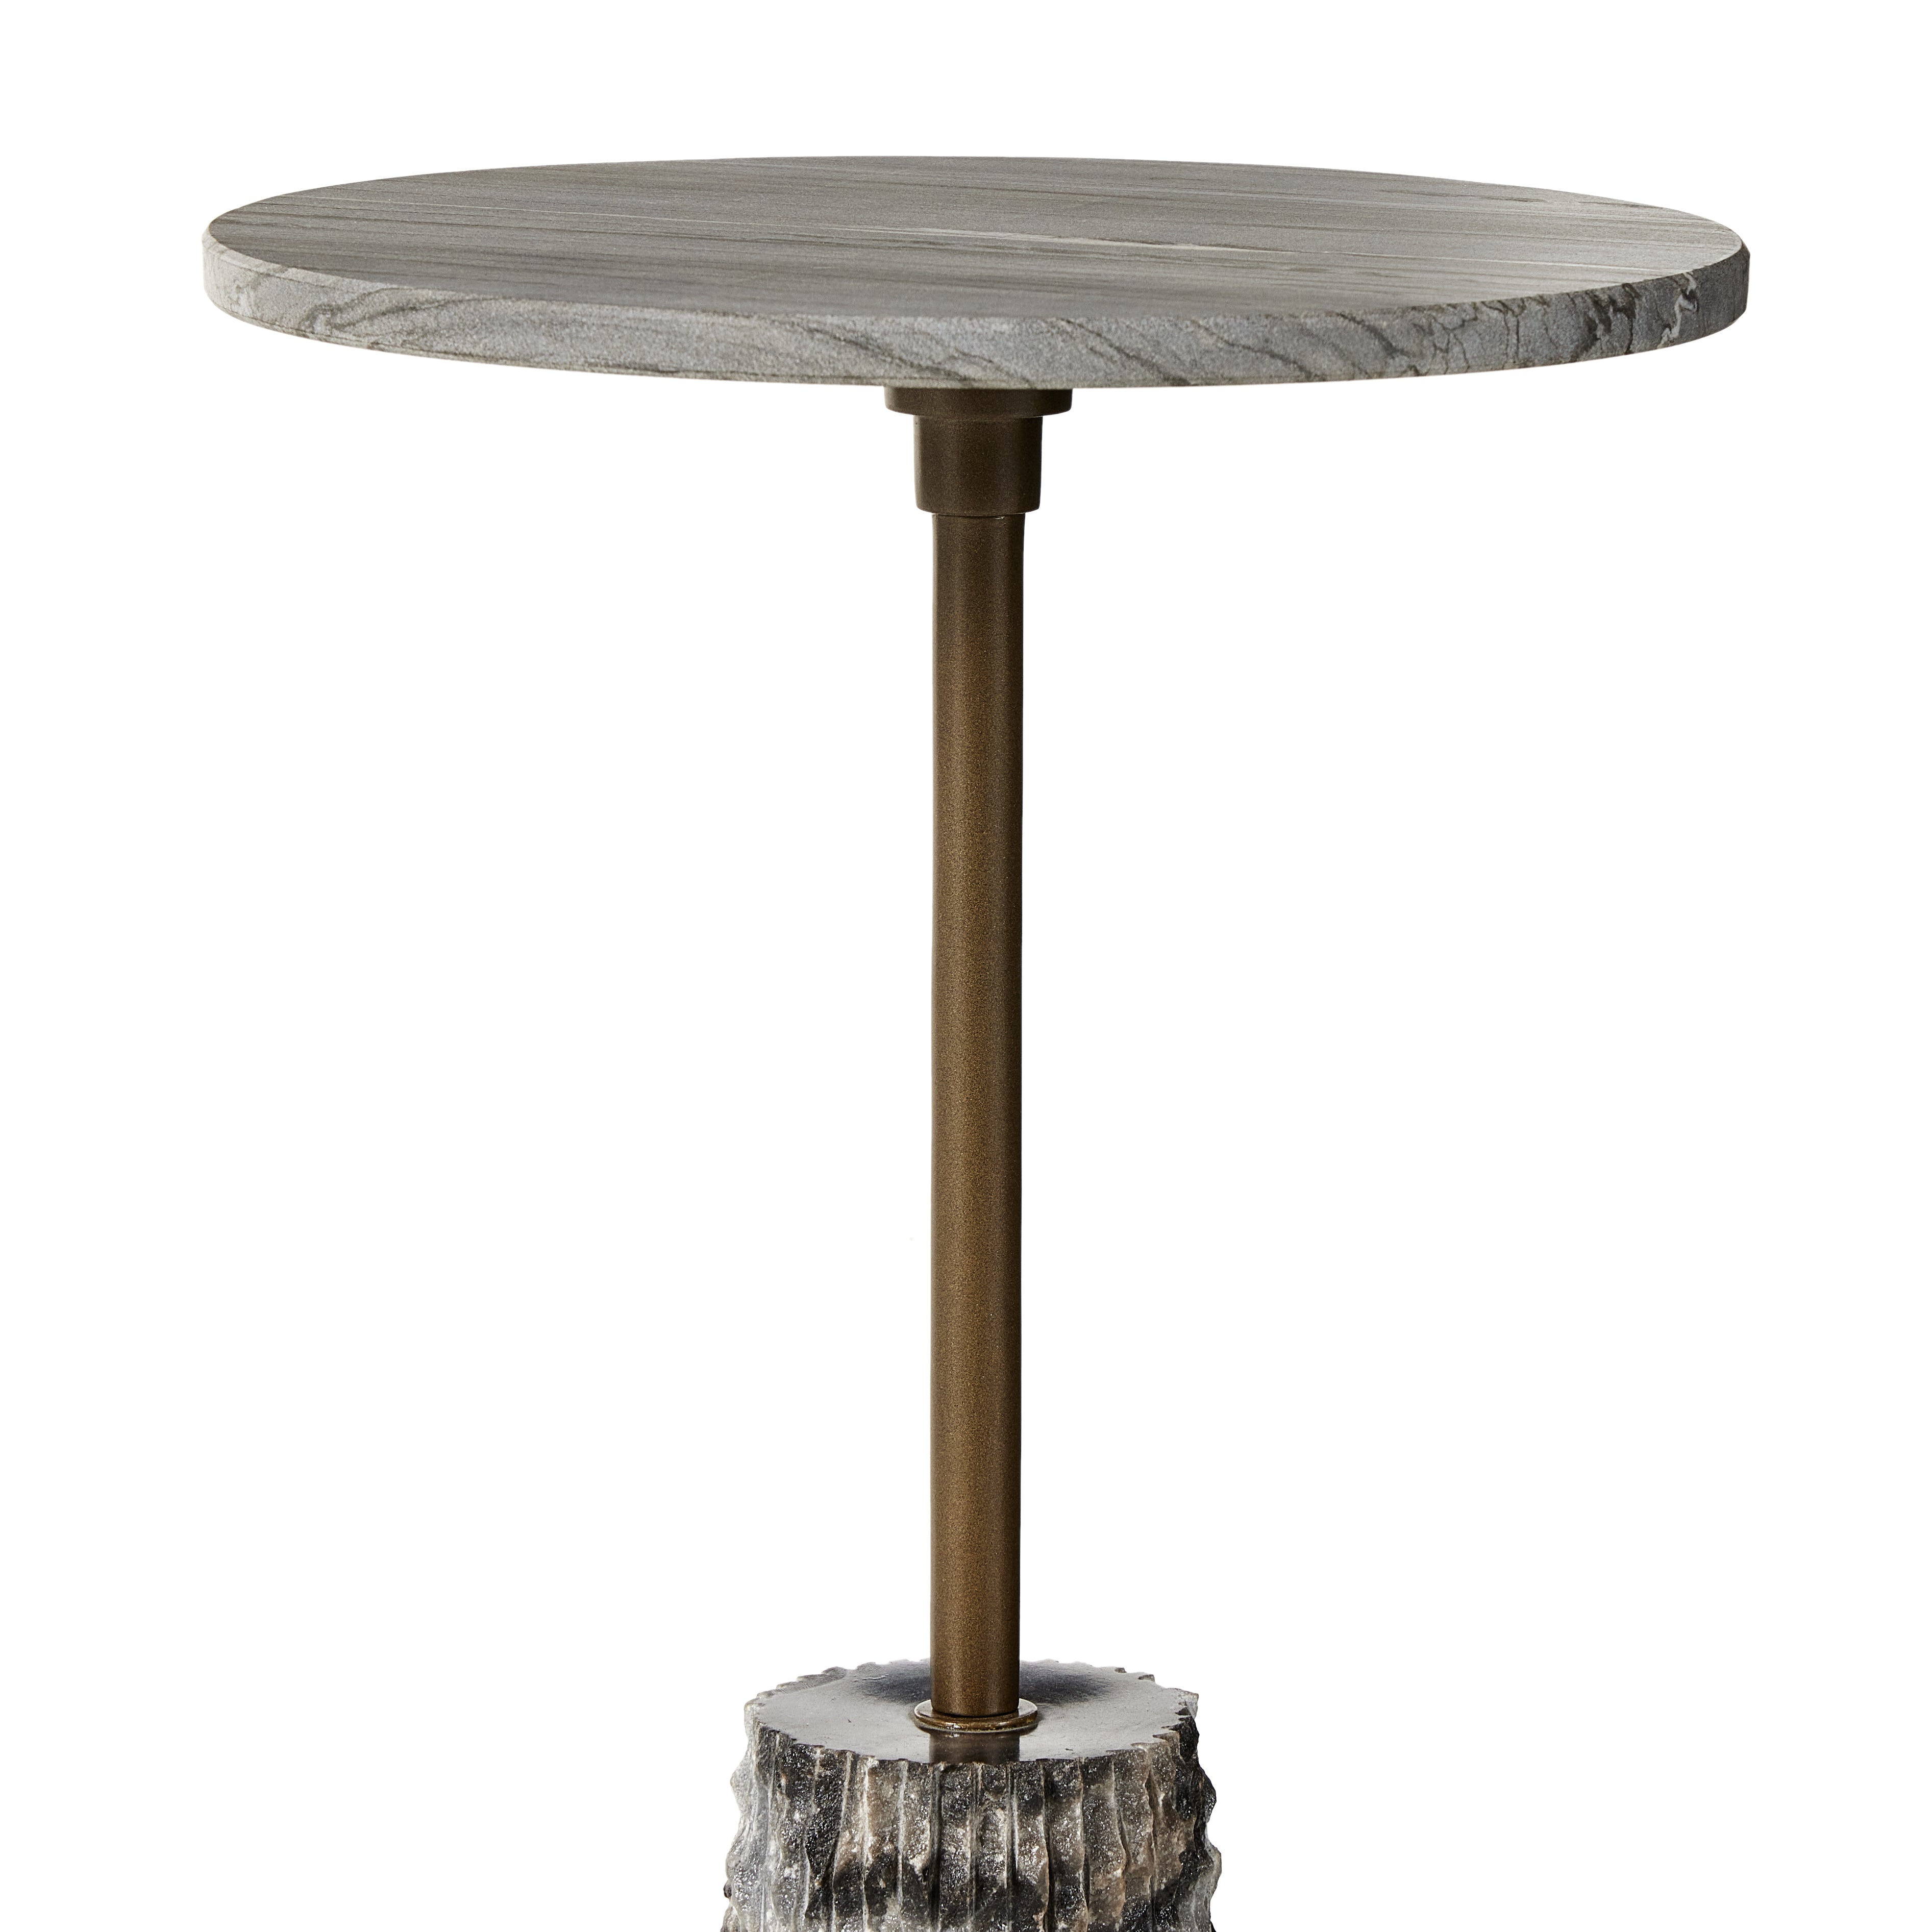 A tessellated cone-shaped marble base and matching tabletop pairs with a spare iron stem. Perfectly sized to keep your favorite drink or book within reach. Amethyst Home provides interior design, new construction, custom furniture, and area rugs in the Dallas metro area.